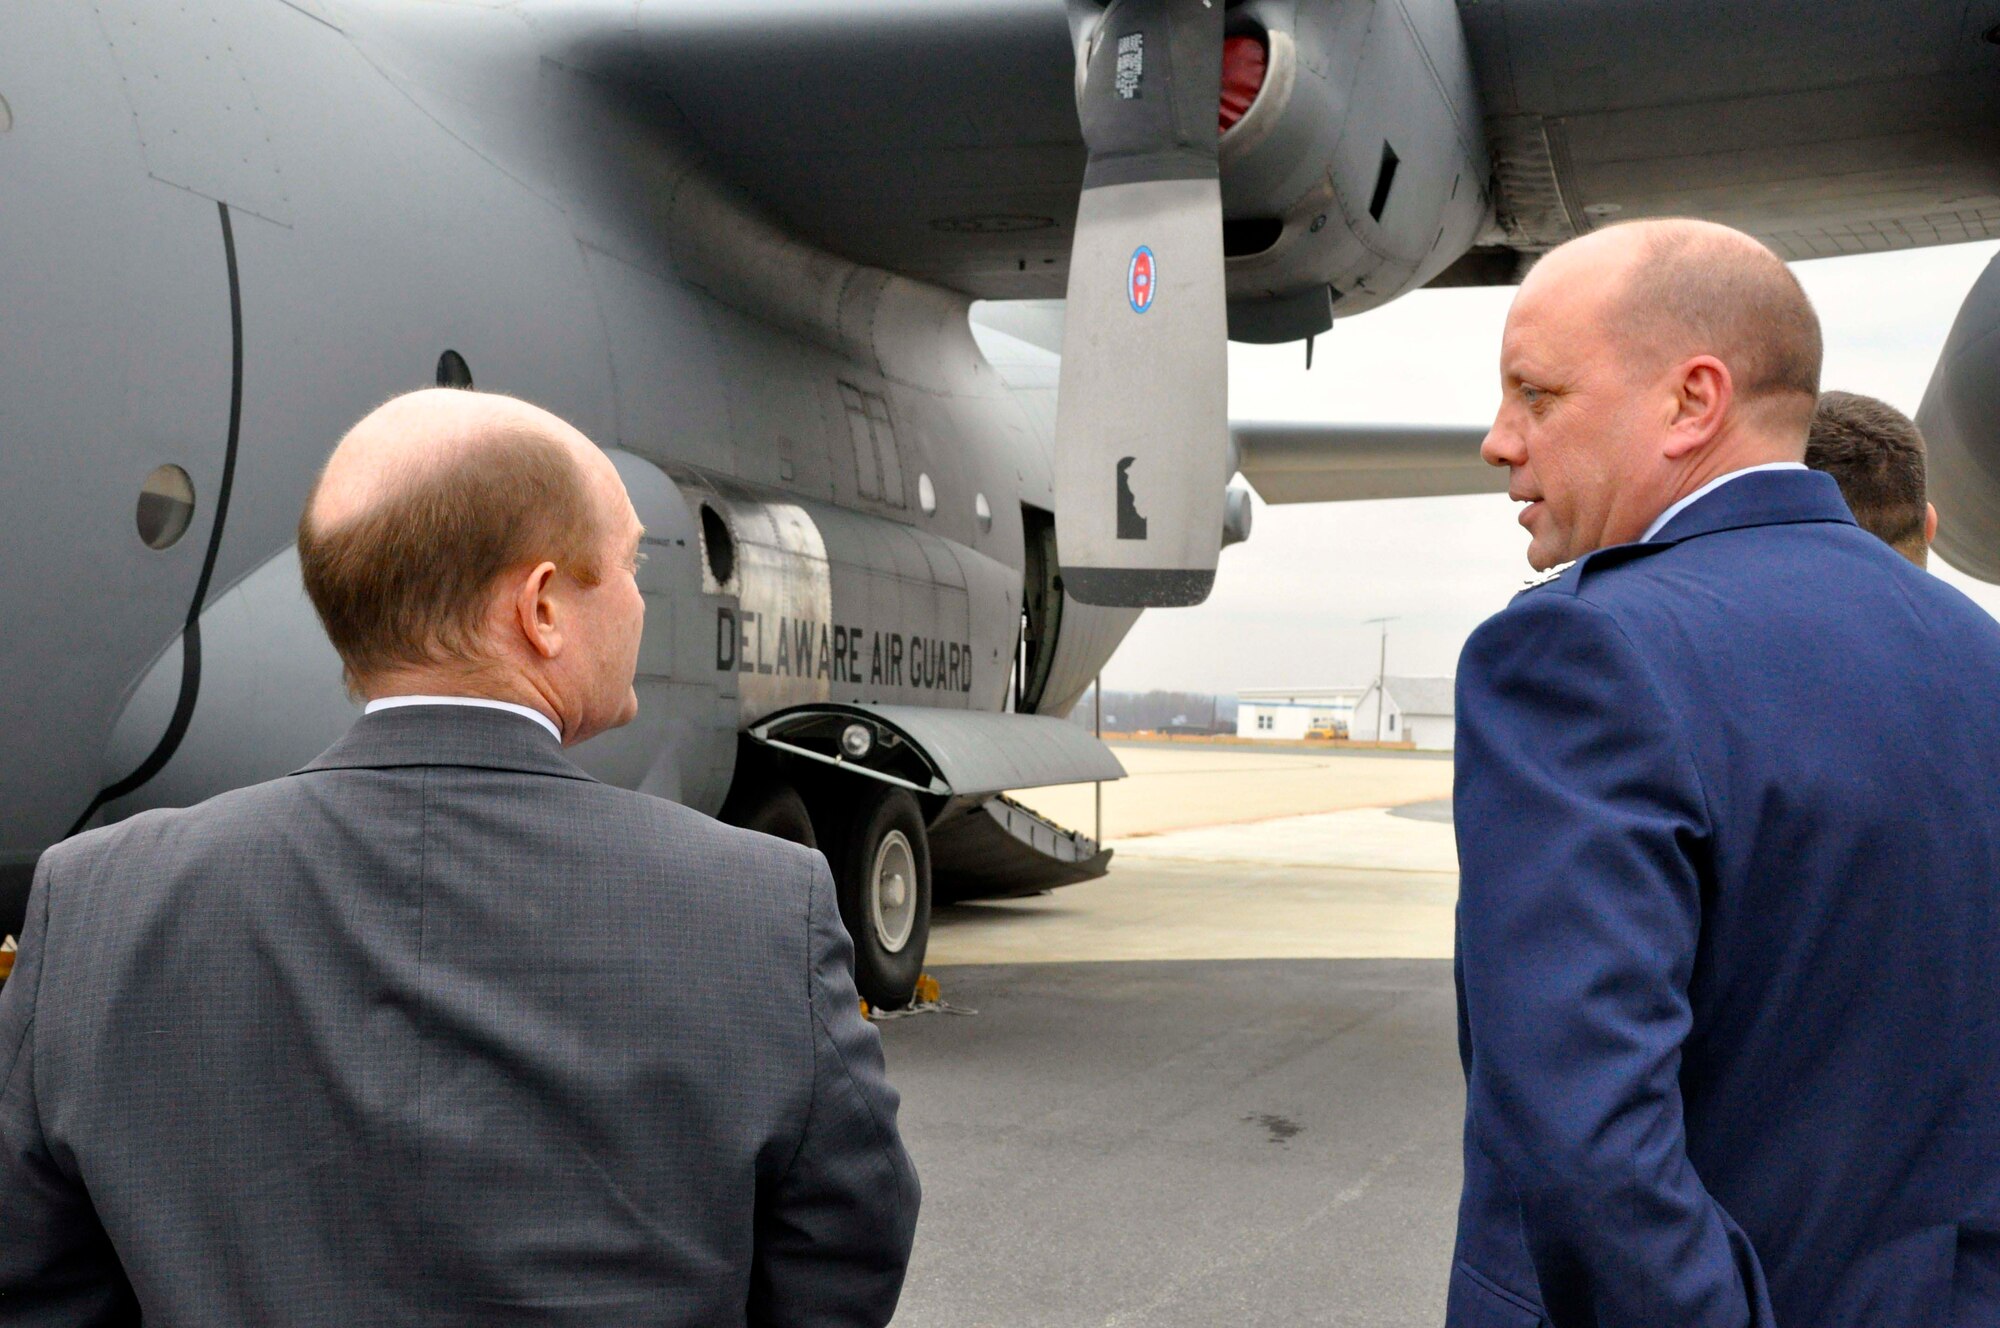 U.S. Air Force Col. Dave Byerly, vice commander, 166th Airlift Wing, Delaware Air National Guard, and U.S. Sen. Chris Coons (D-Del.) discuss the C-130 aircraft and the mission of the Delaware ANG prior to a tour of a C-130H on Dec. 2, 2013 at the New Castle ANG Base, Del. (U.S. Army National Guard photo by Staff Sgt. Wendy McDougall)